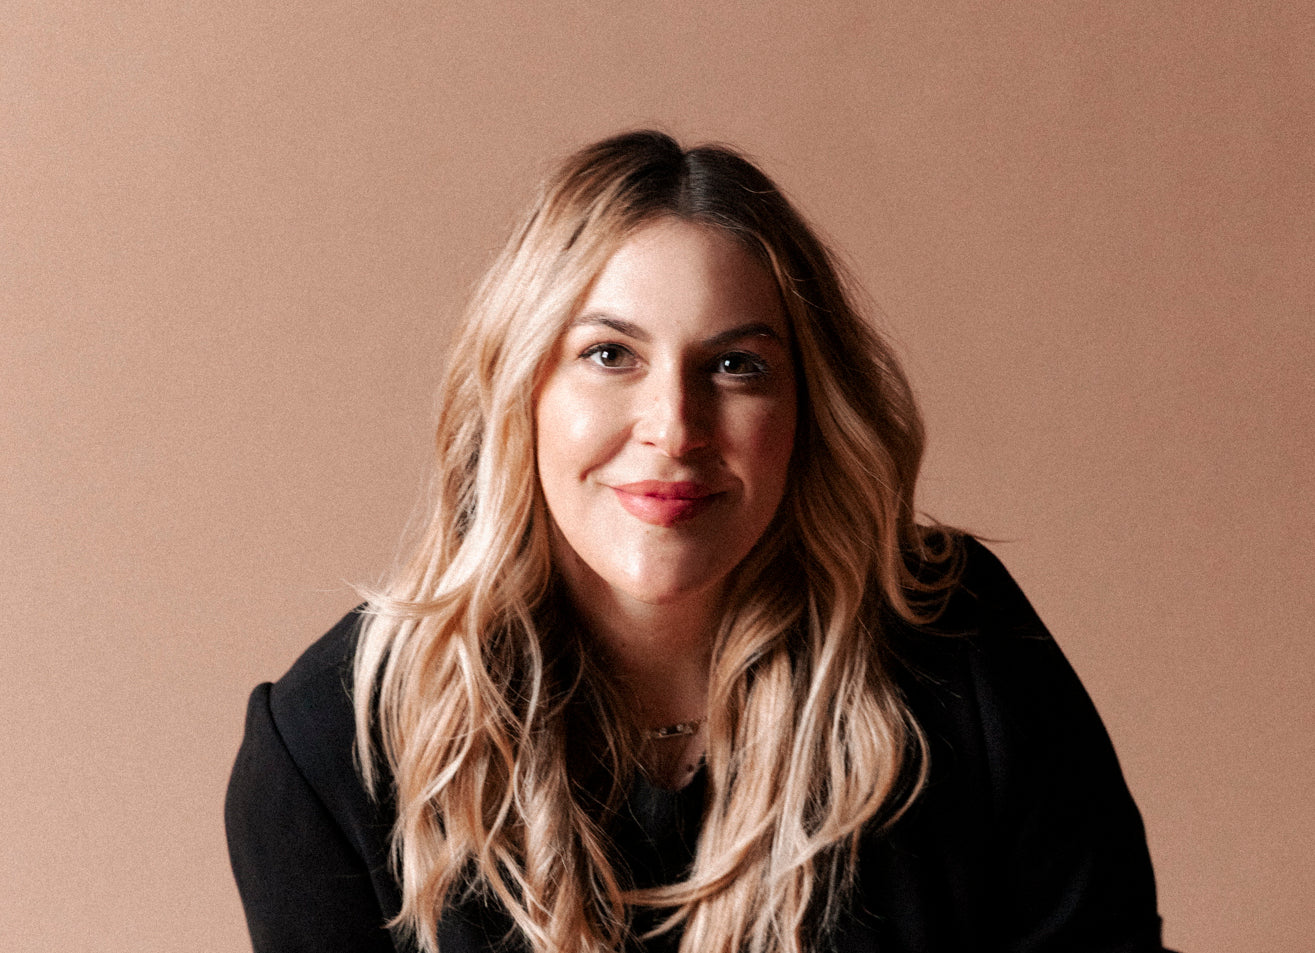 Moments with Rachel Liverman, Co-Founder of Glowbar